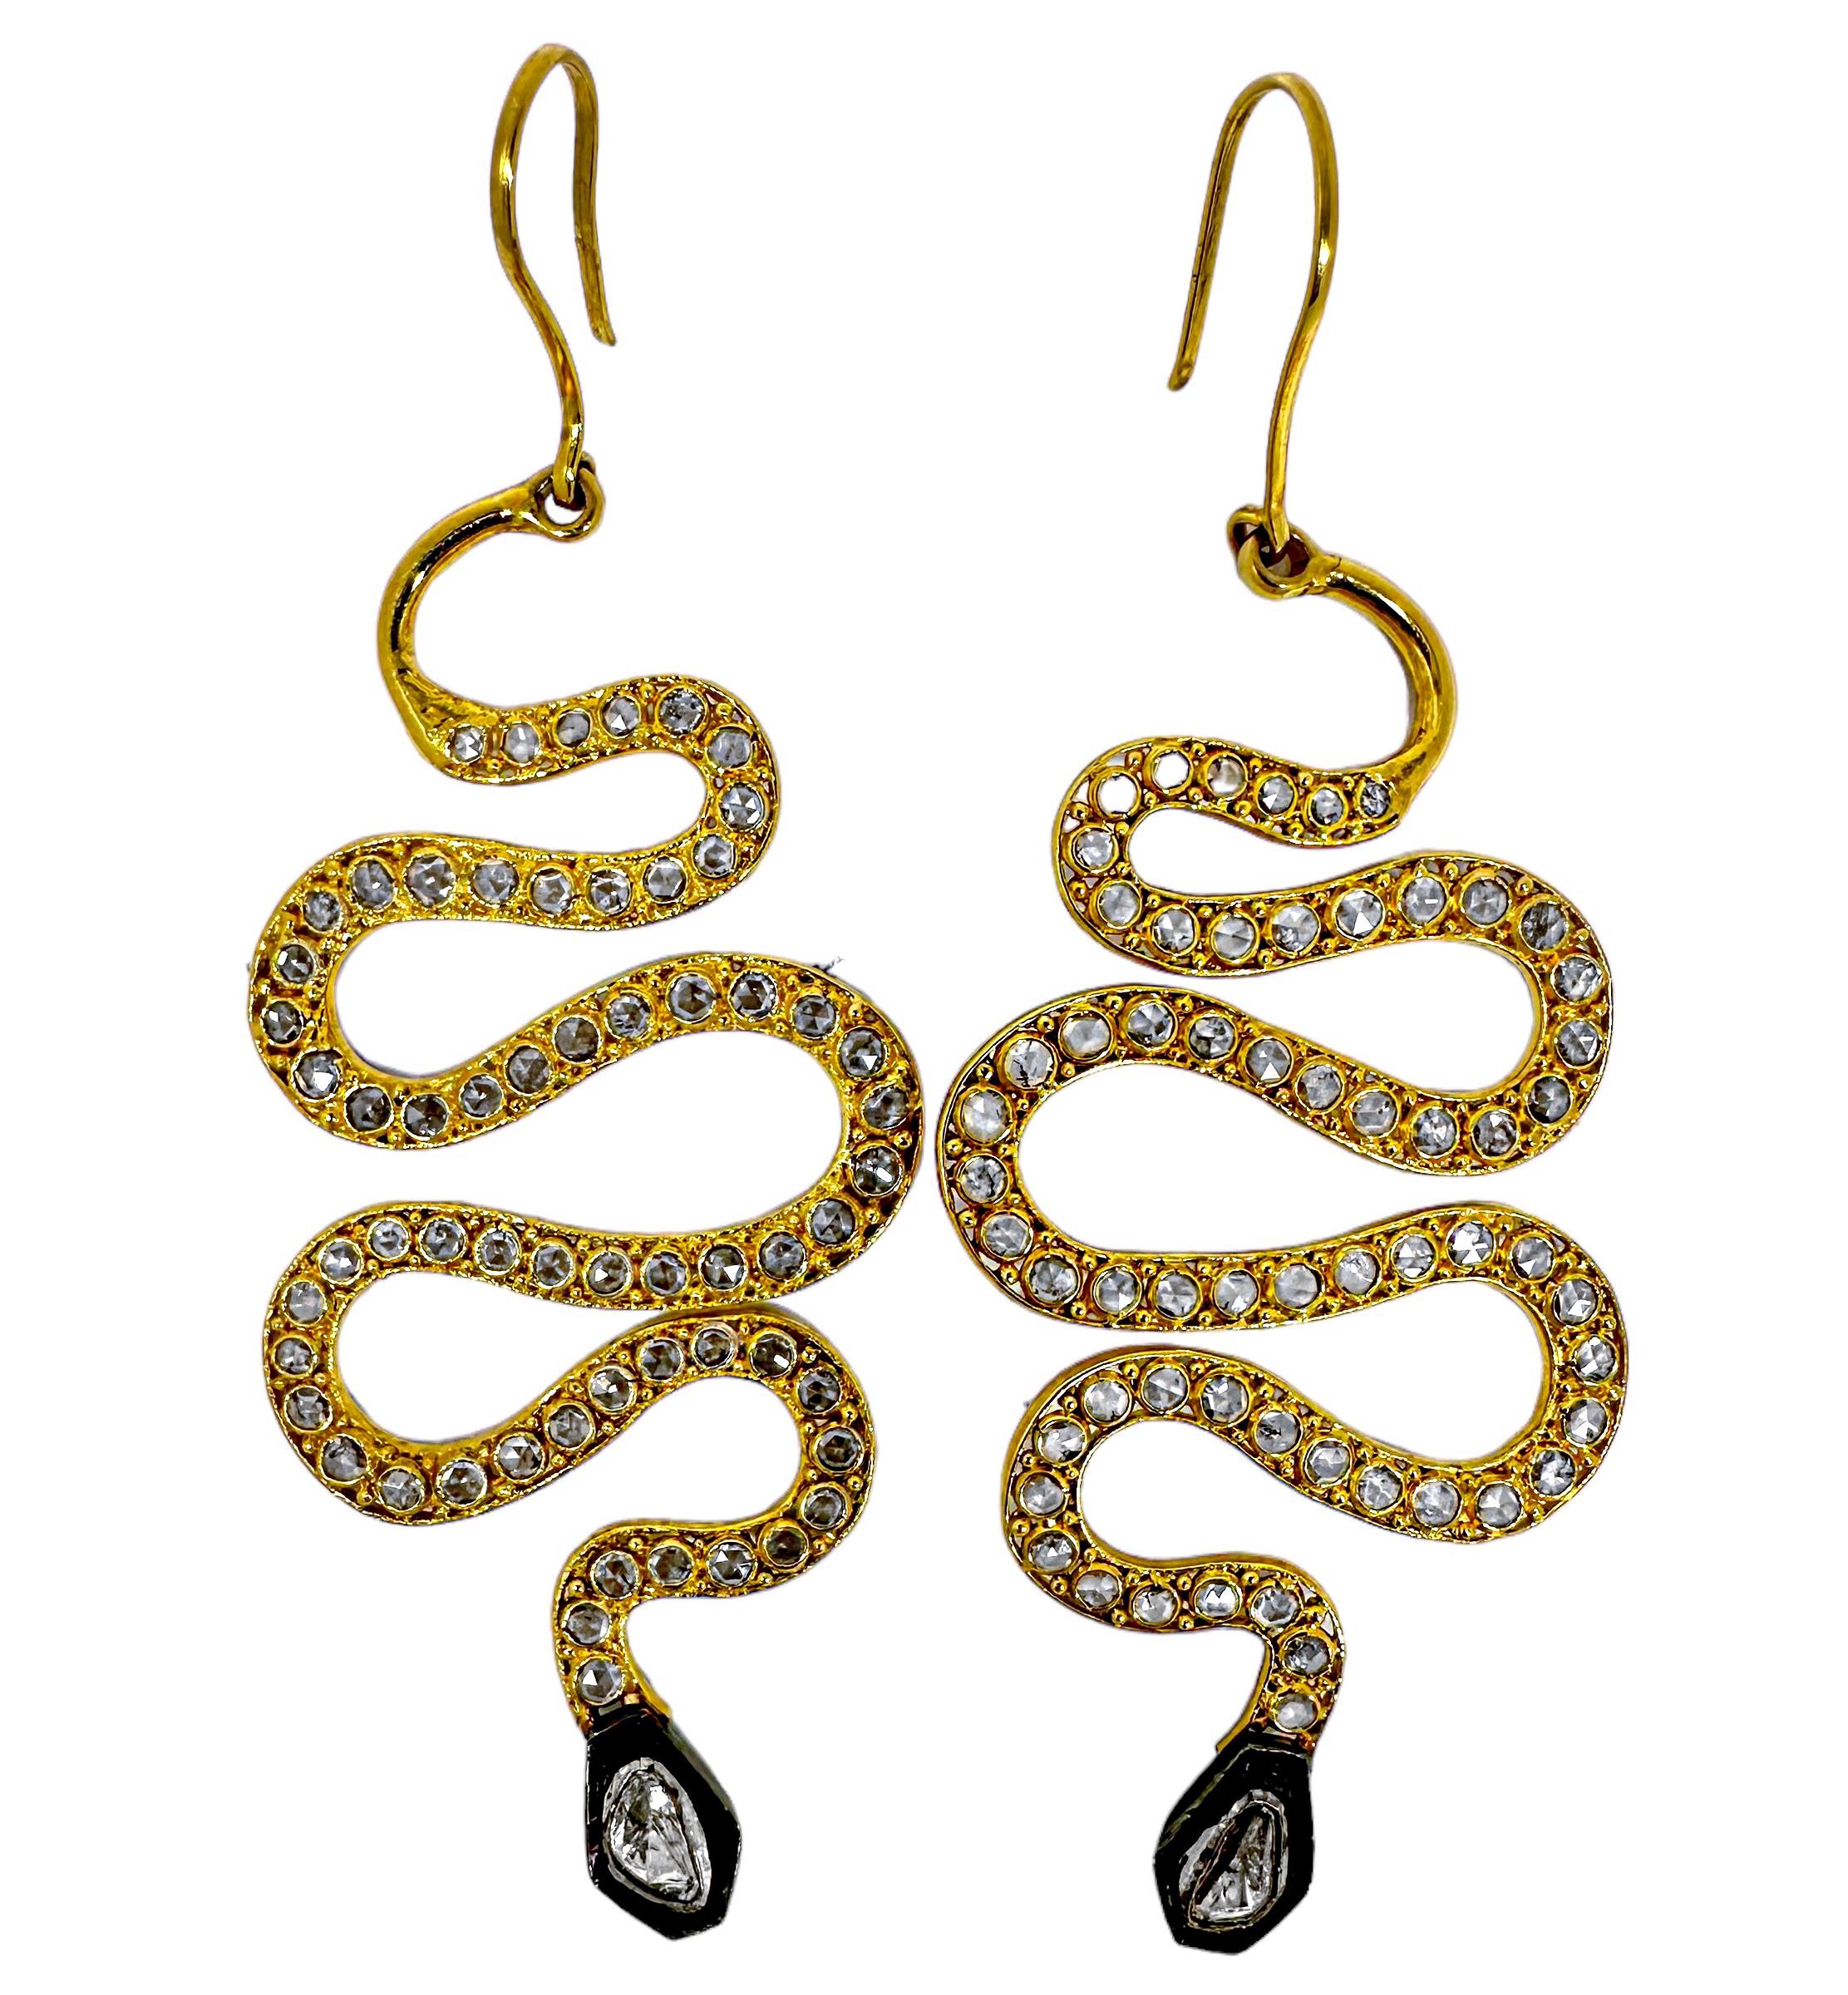 This stylish and contemporary pair of serpentine earrings measure a full 3 1/2 inches in length by 1 3/8 inches in width. The bezel set rose cut diamonds over the entire length plus the two larger rose cut diamonds set in oxidized plates at the